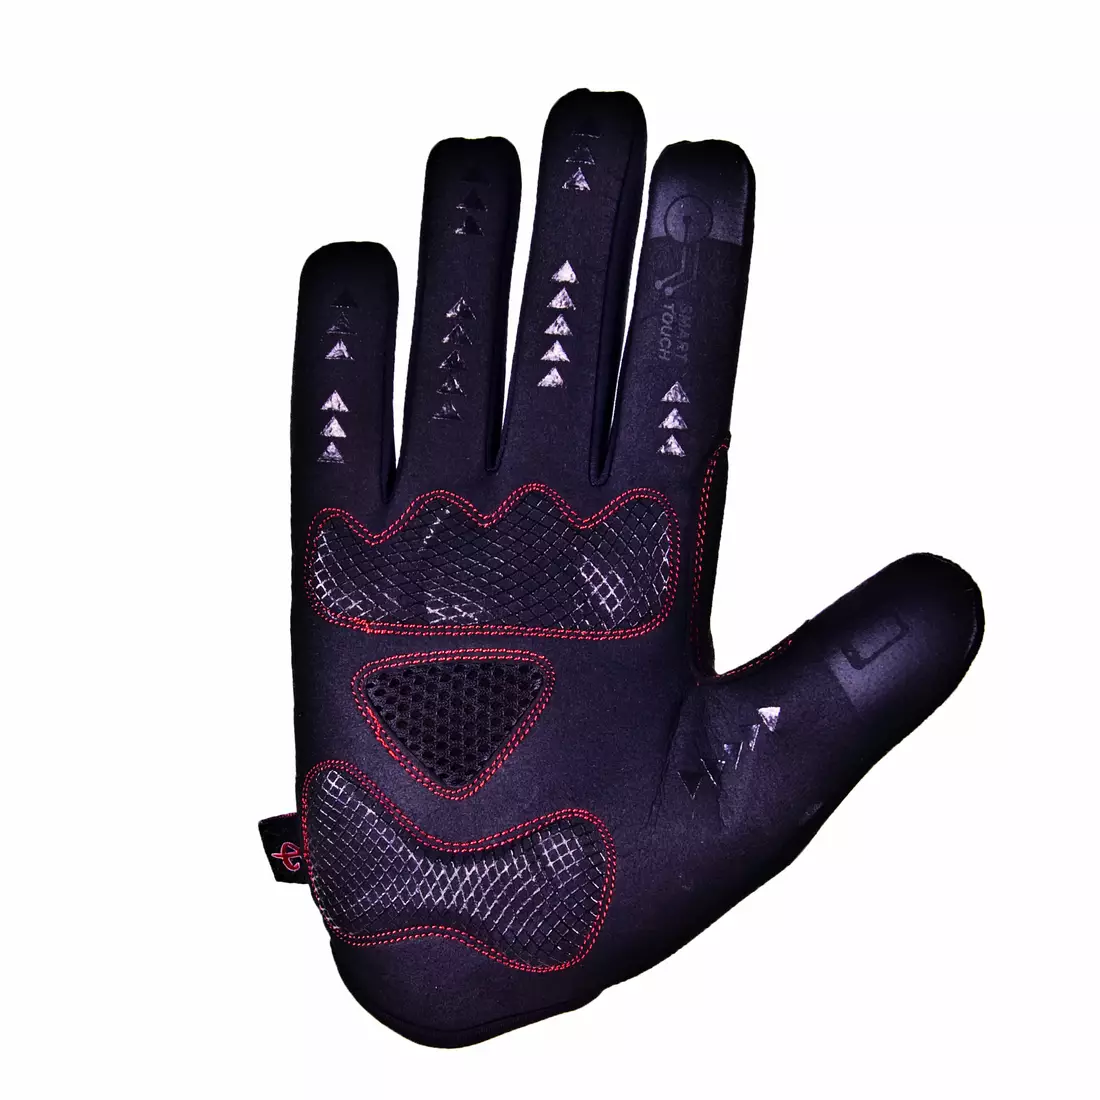 DEKO ROST winter cycling gloves black and red DKWG-0715-006A